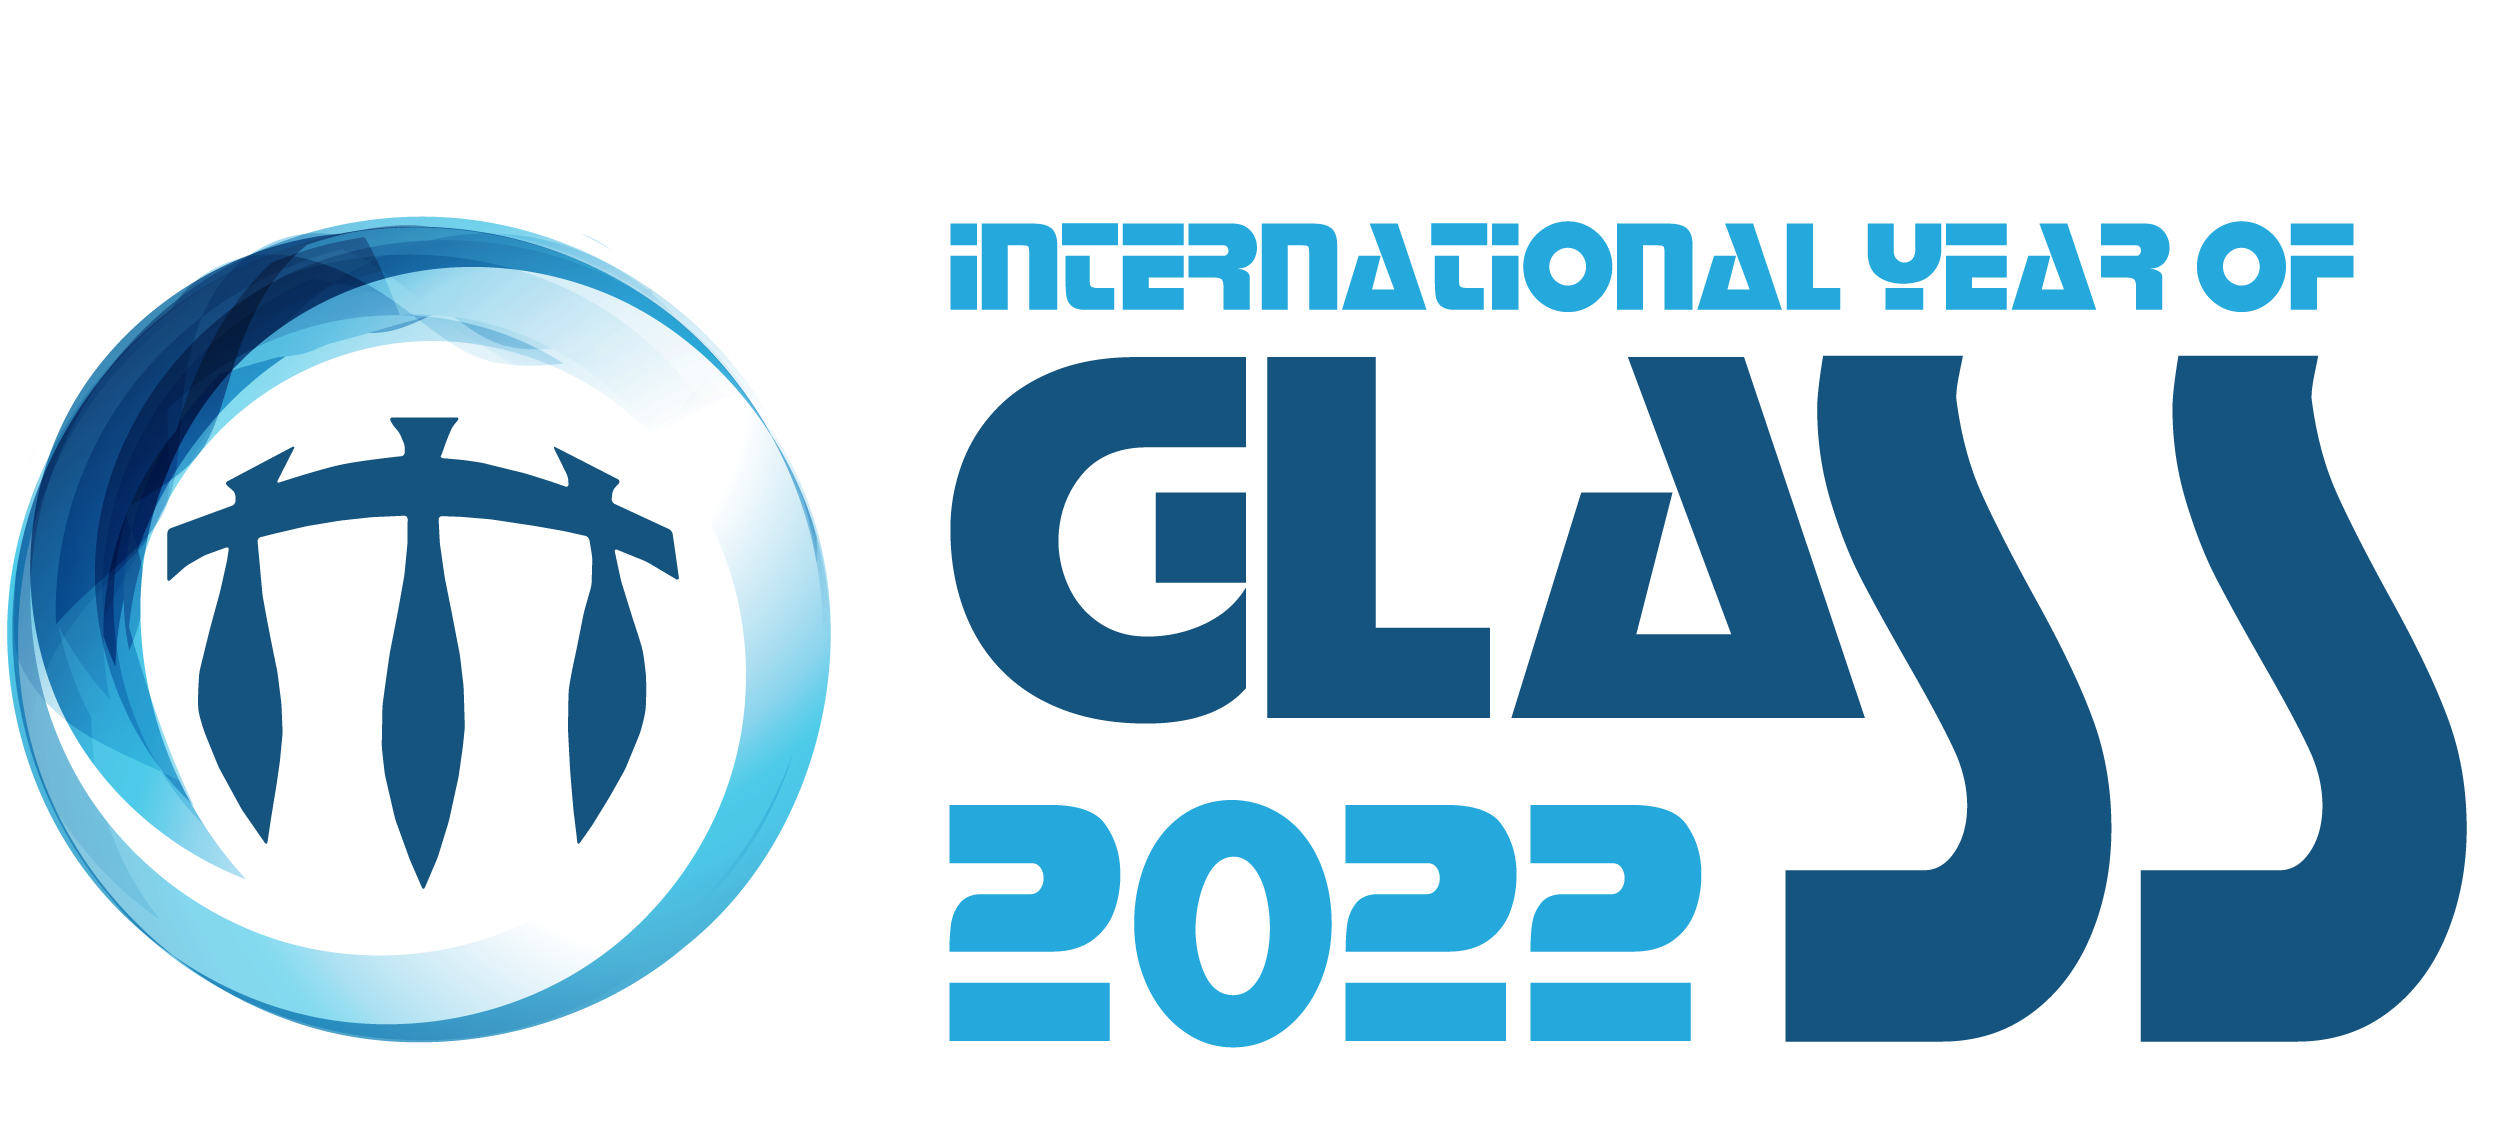 The International Year of Glass 2022